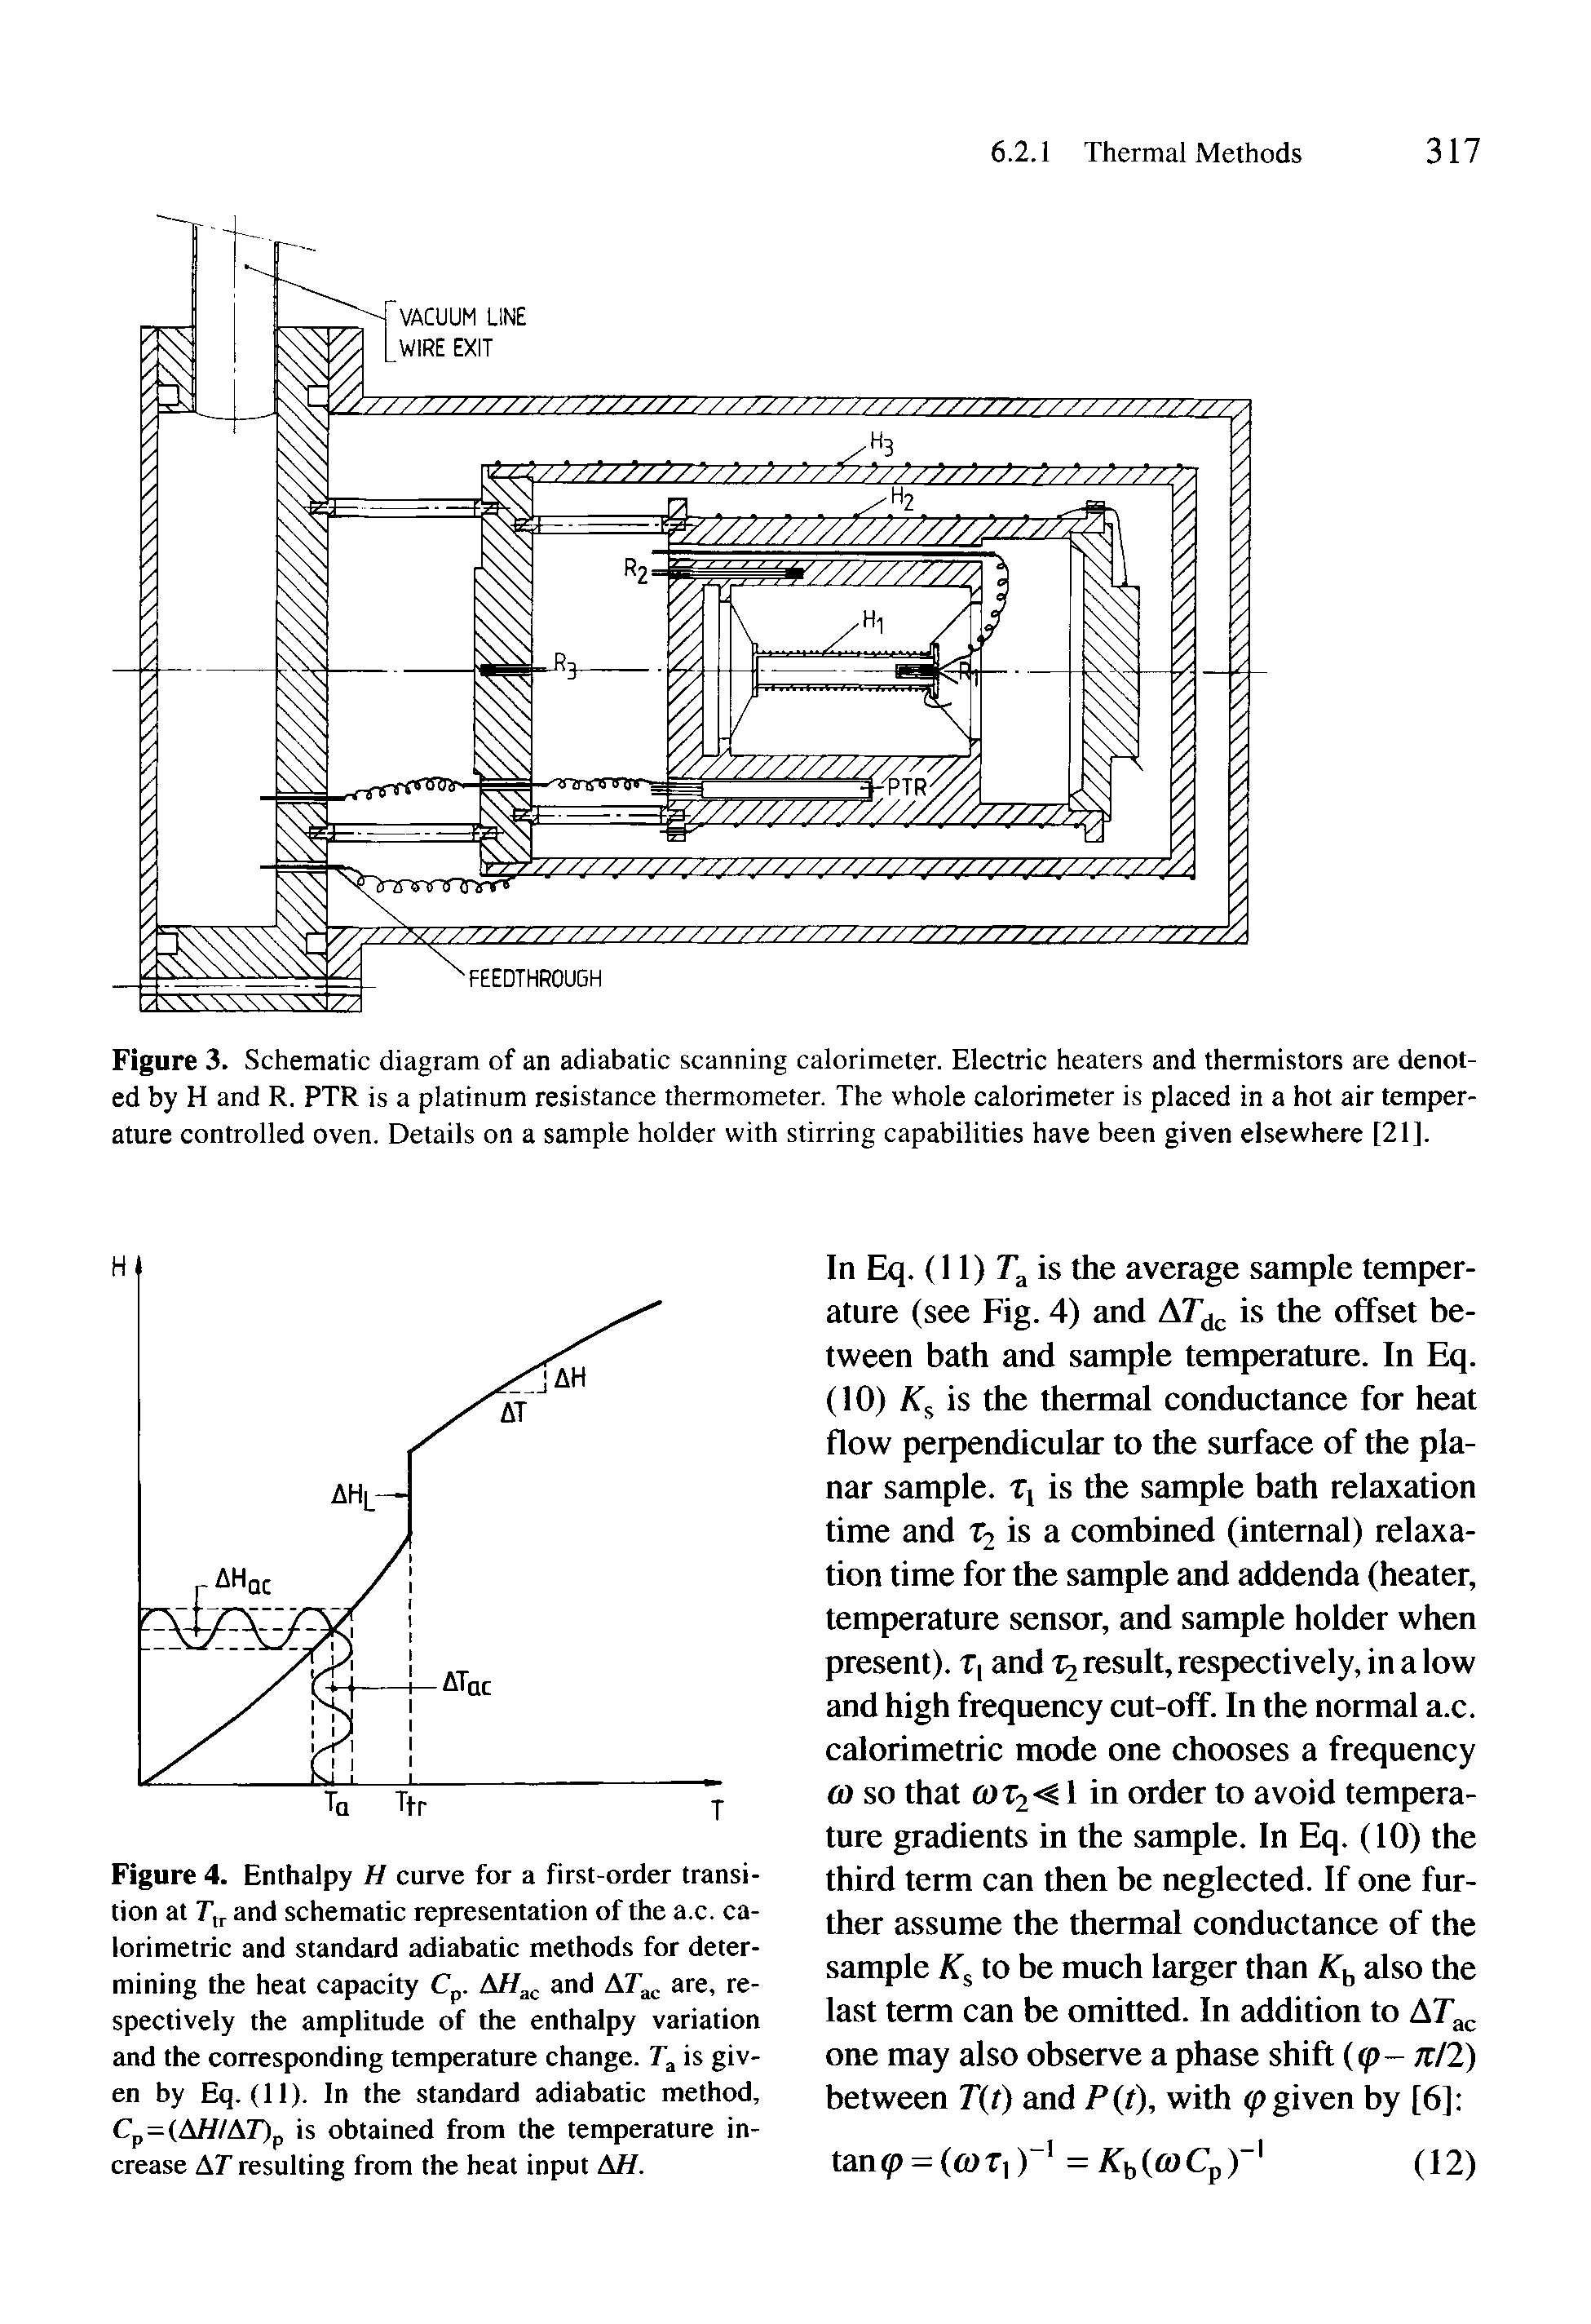 Figure 3. Schematic diagram of an adiabatic scanning calorimeter. Electric heaters and thermistors are denoted by H and R. PTR is a platinum resistance thermometer. The whole calorimeter is placed in a hot air temperature controlled oven. Details on a sample holder with stirring capabilities have been given elsewhere [21].